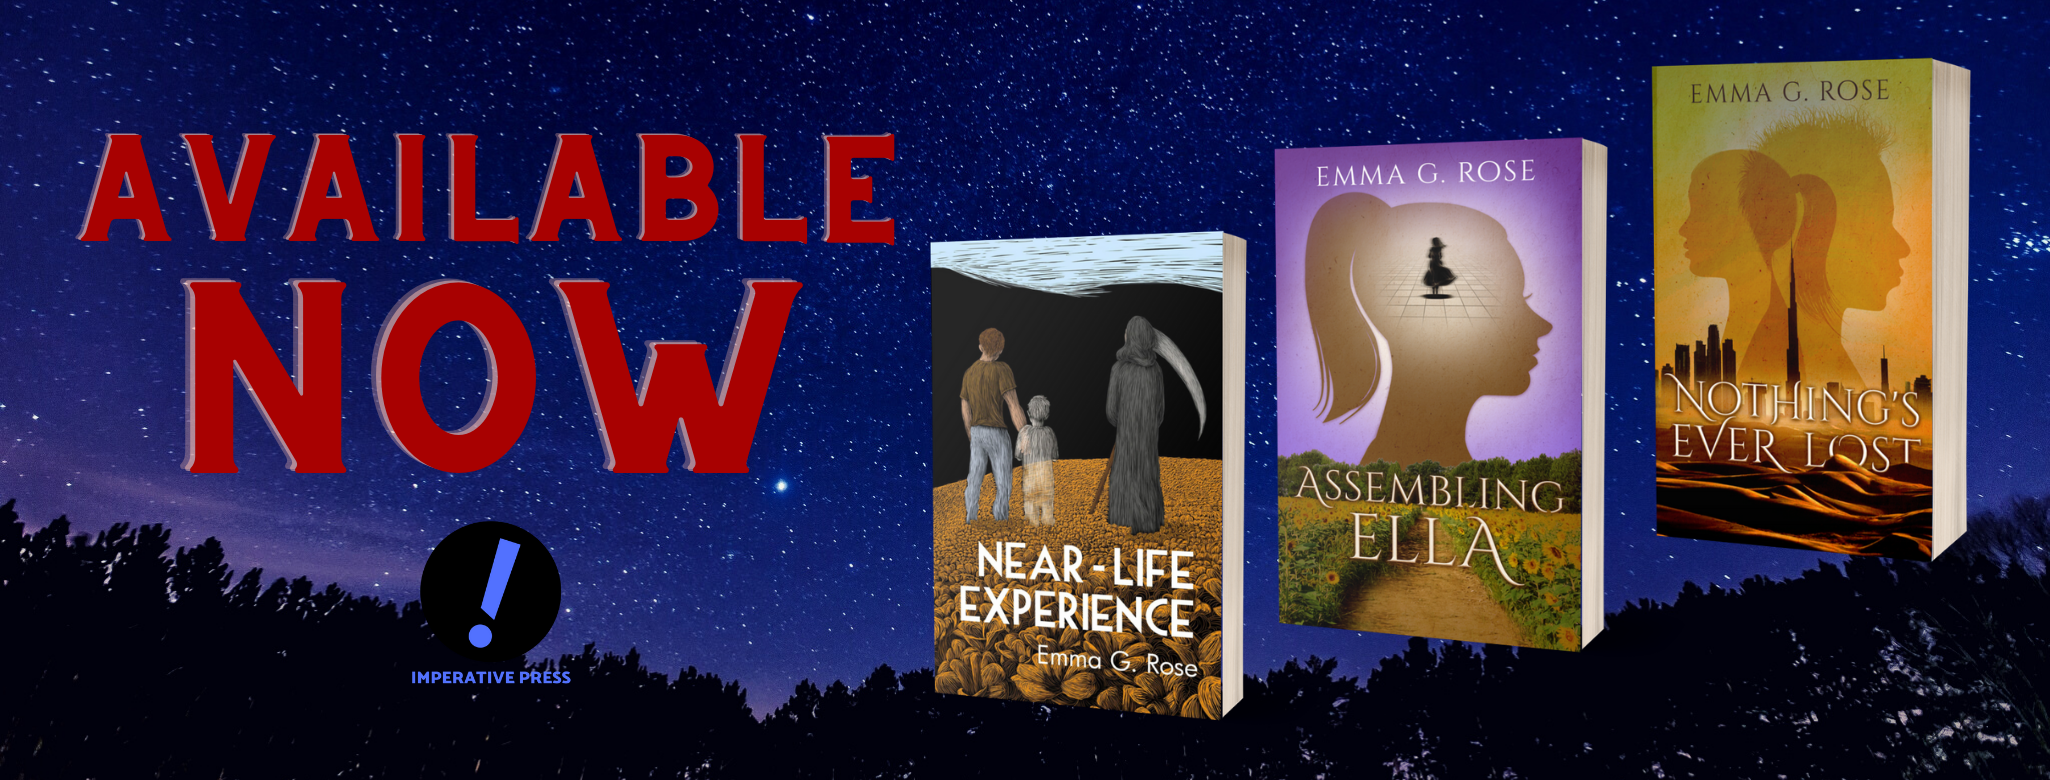 Emma G Rose has three books available now: Nothing's Ever Lost, Near-Life Experience, and Assembling Ella. You get a 20% bulk discount when you book an author visit.